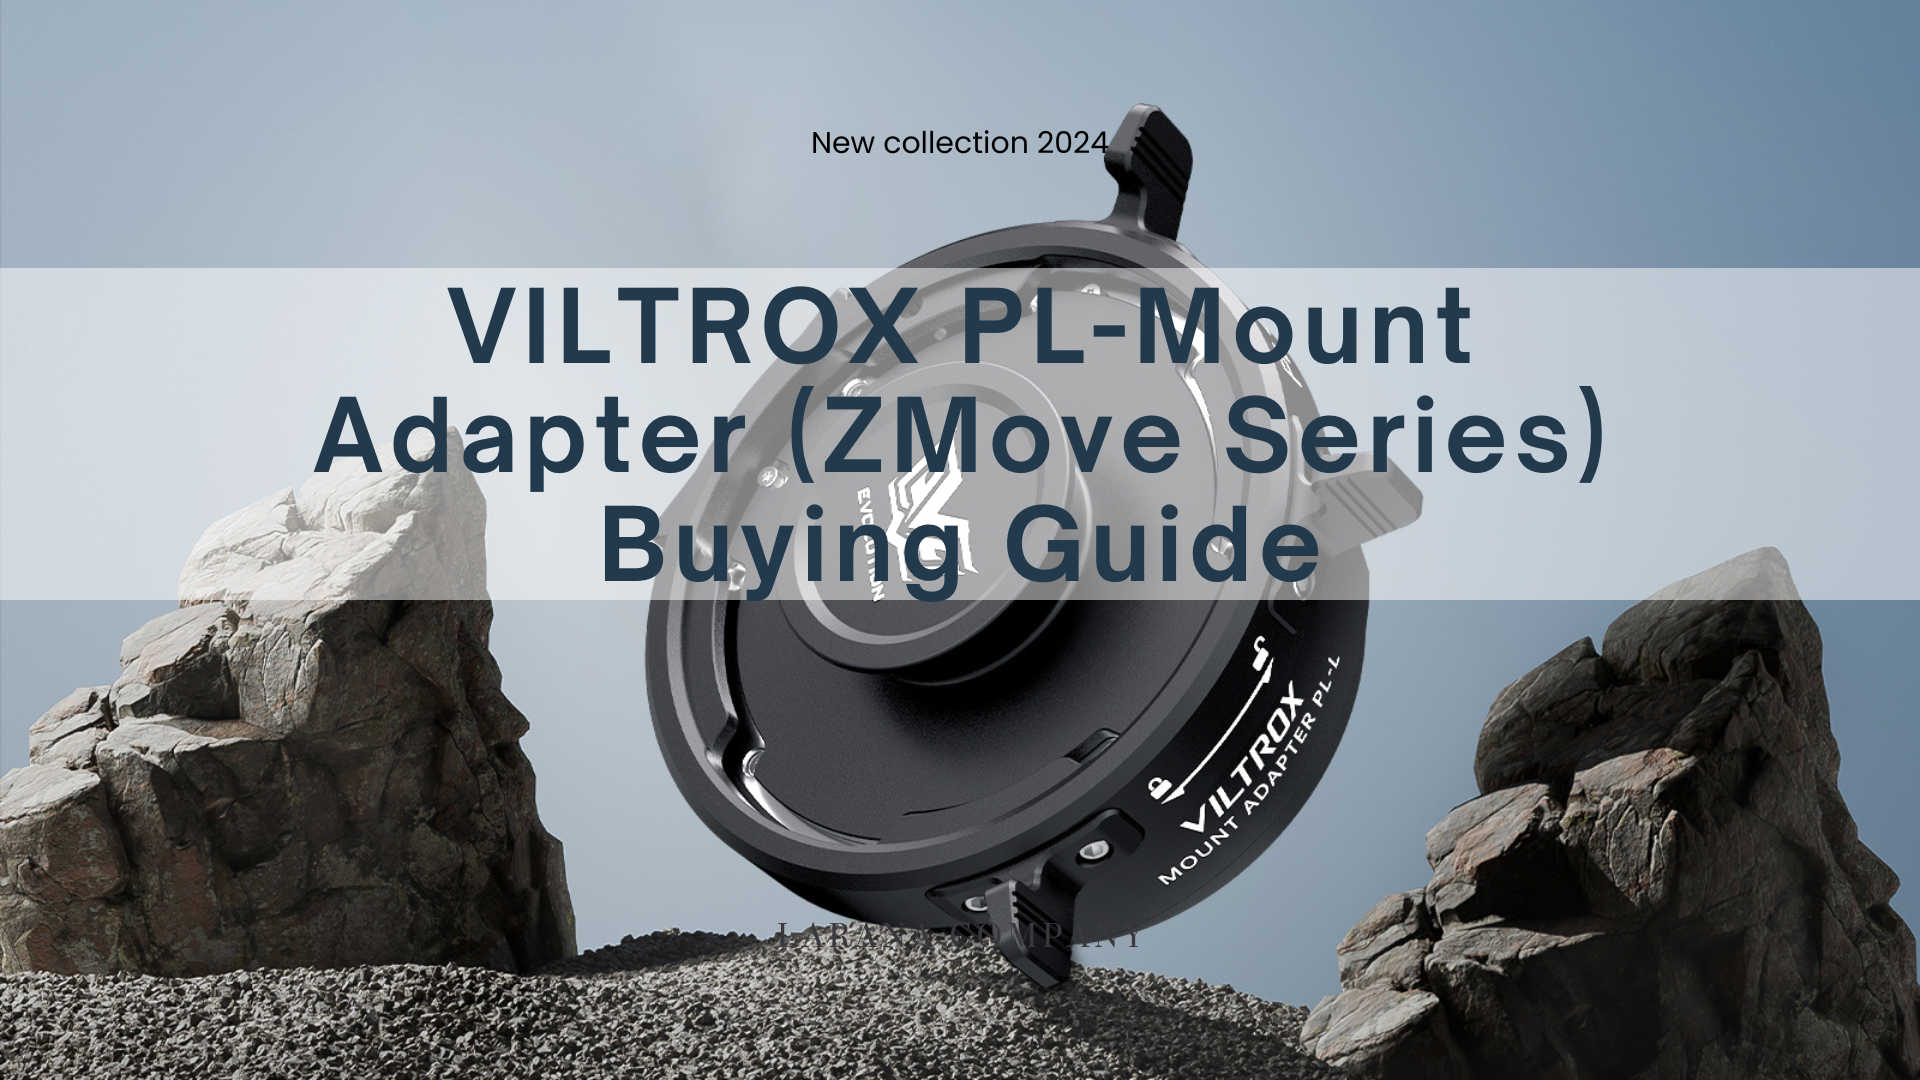 Viltrox PL-Mount Adapter (ZMove Series) Buying Guide